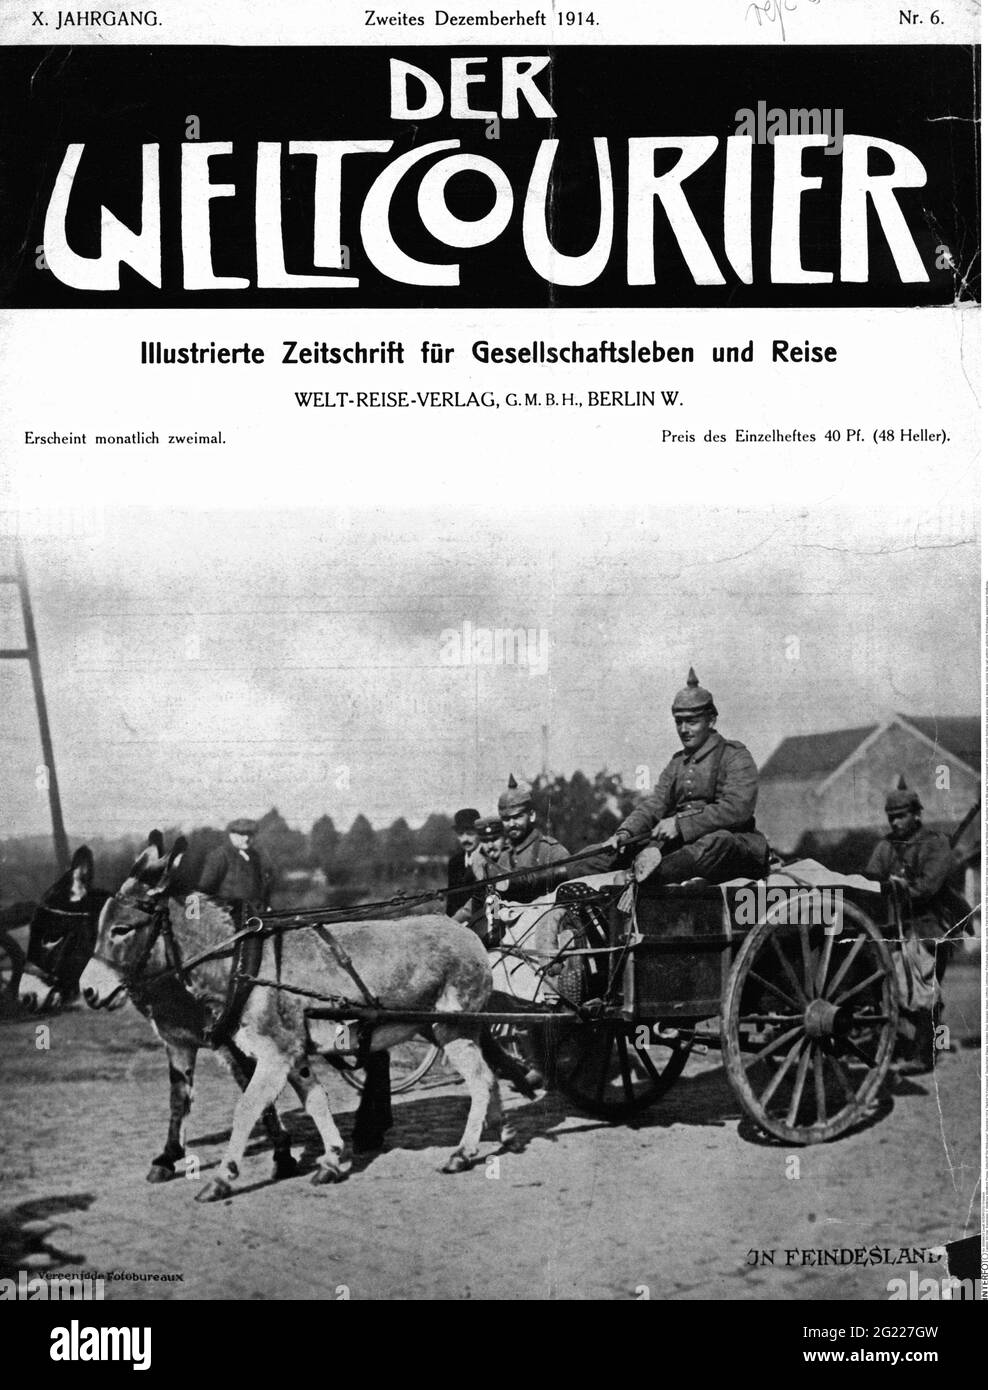 events, First World War / WWI, Western Front, press / media, journal 'Der Weltcourier', December 1914, ADDITIONAL-RIGHTS-CLEARANCE-INFO-NOT-AVAILABLE Stock Photo